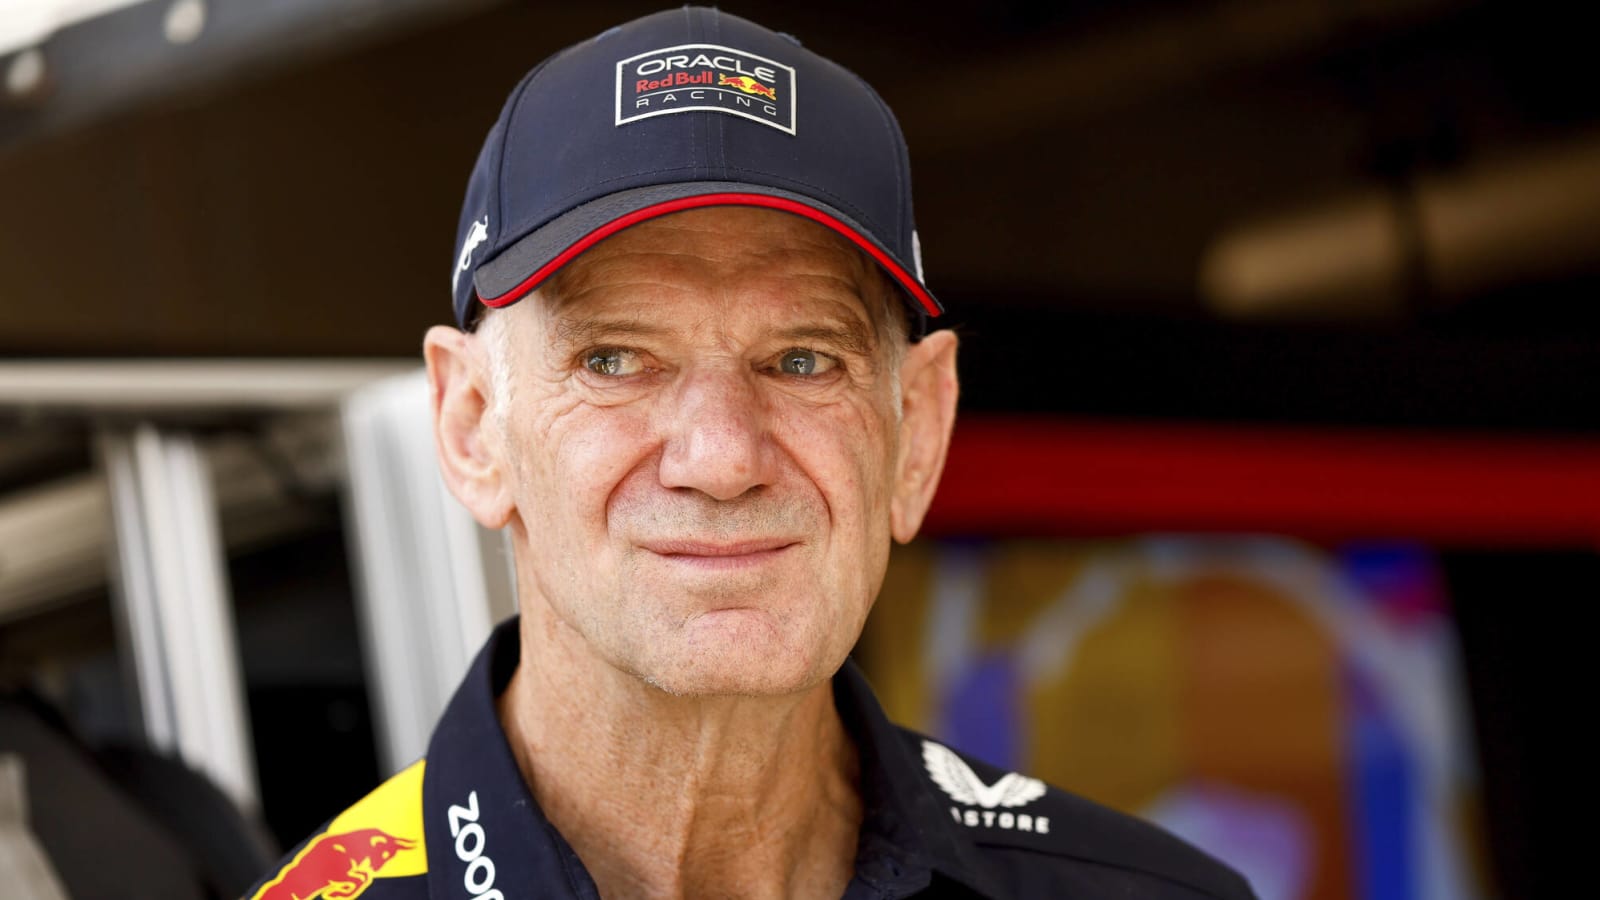 Adrian Newey claims Red Bull ‘wheeled him around for press’ after exit announcement at Miami GP